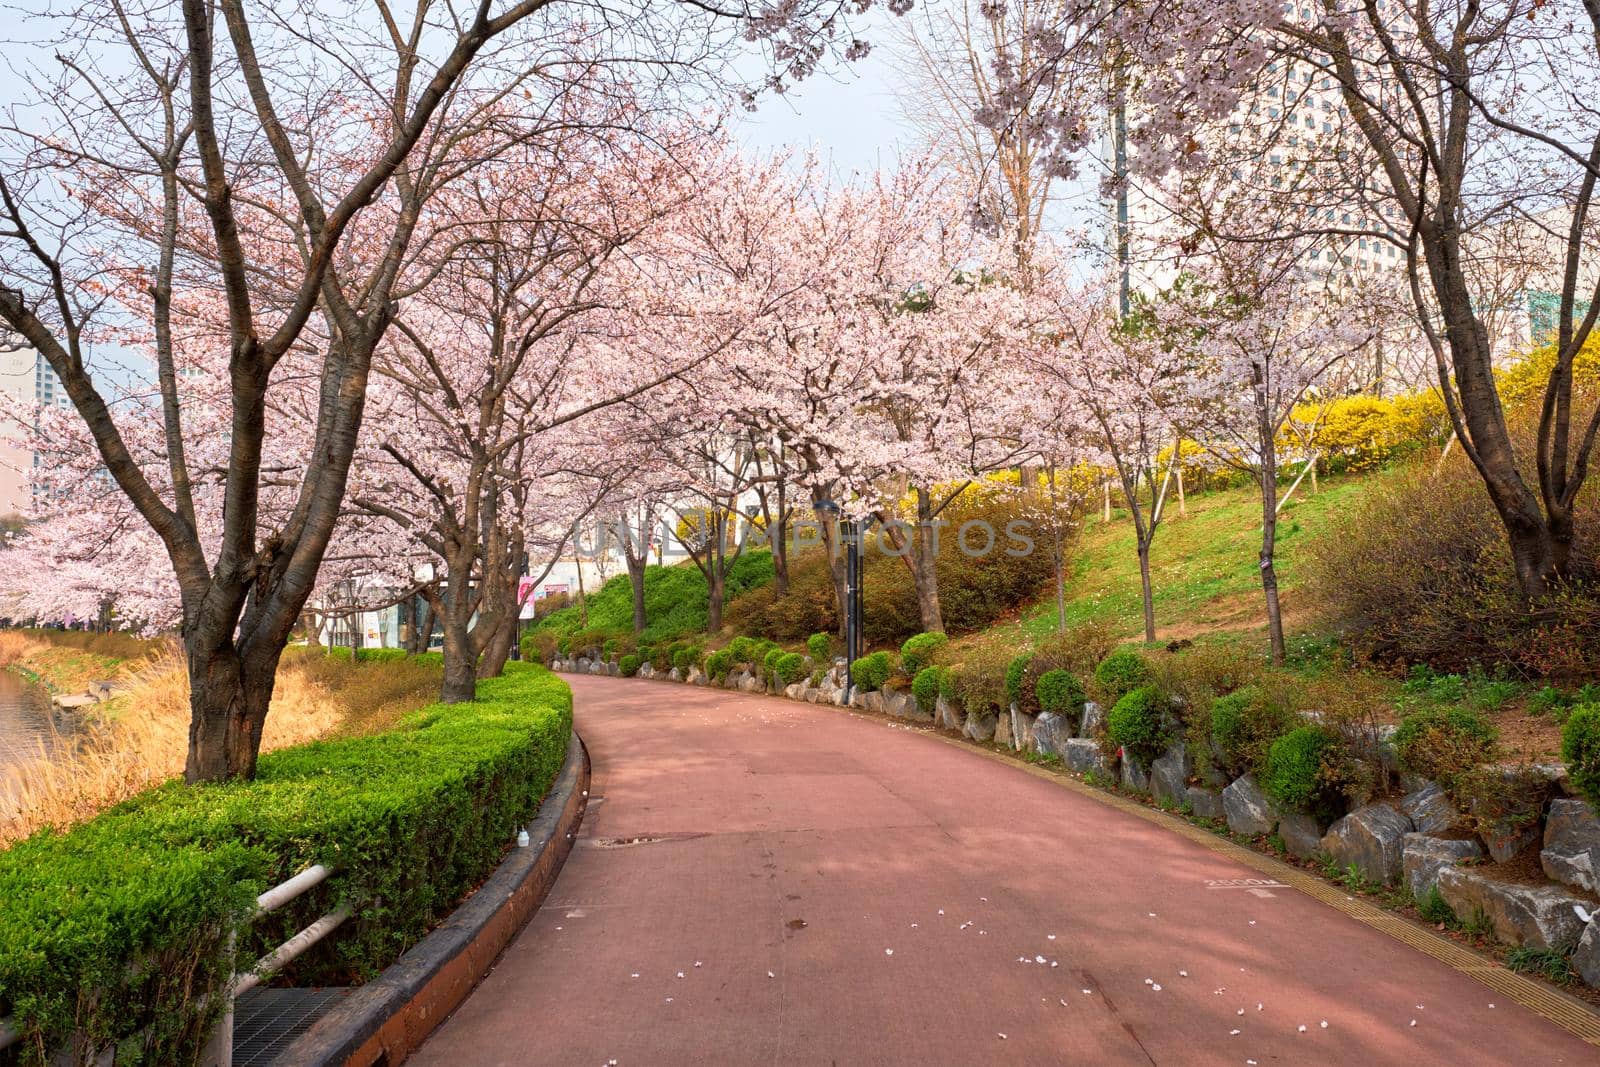 Blooming sakura cherry blossom alley in park by dimol